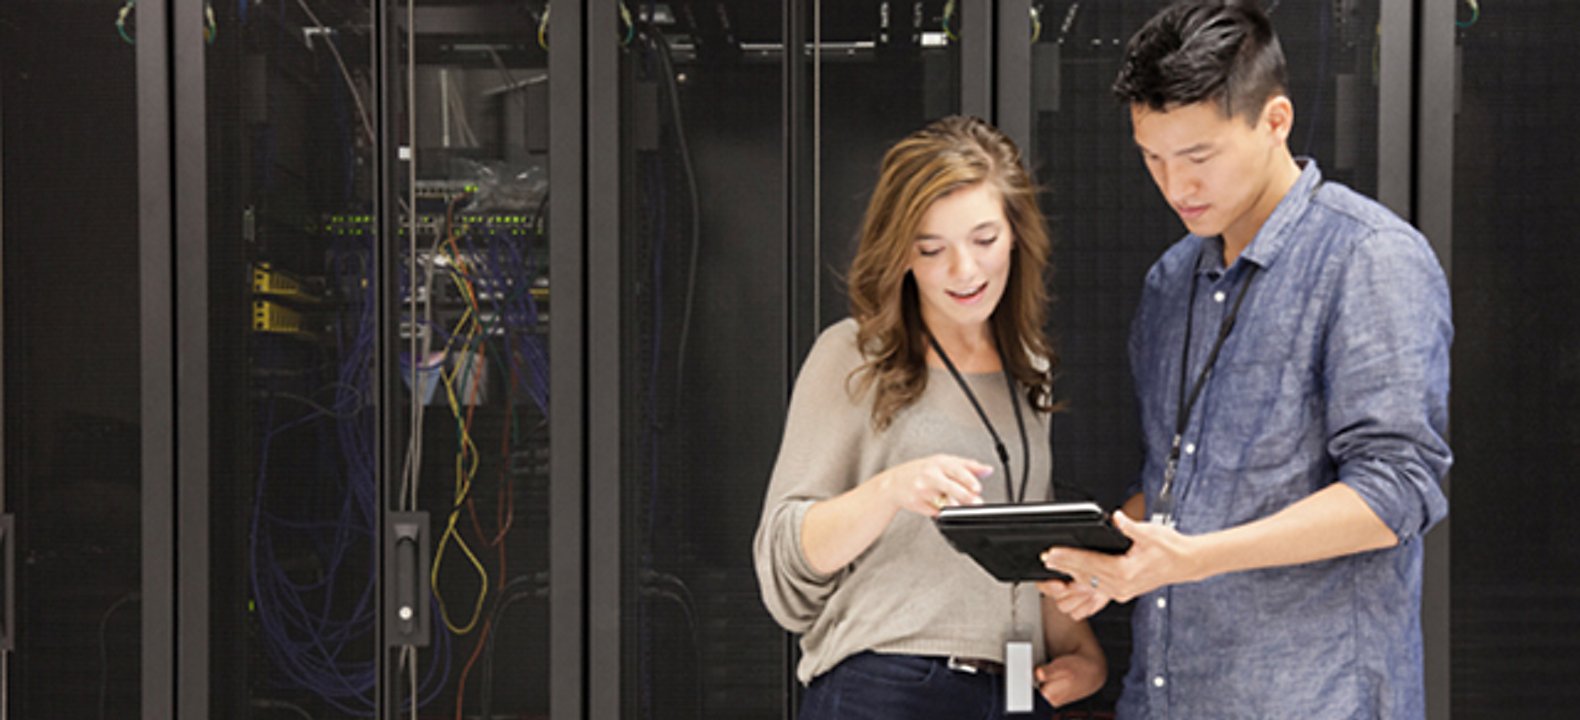 Two people in business casual attire looking at a tablet, while standing in front of office servers.